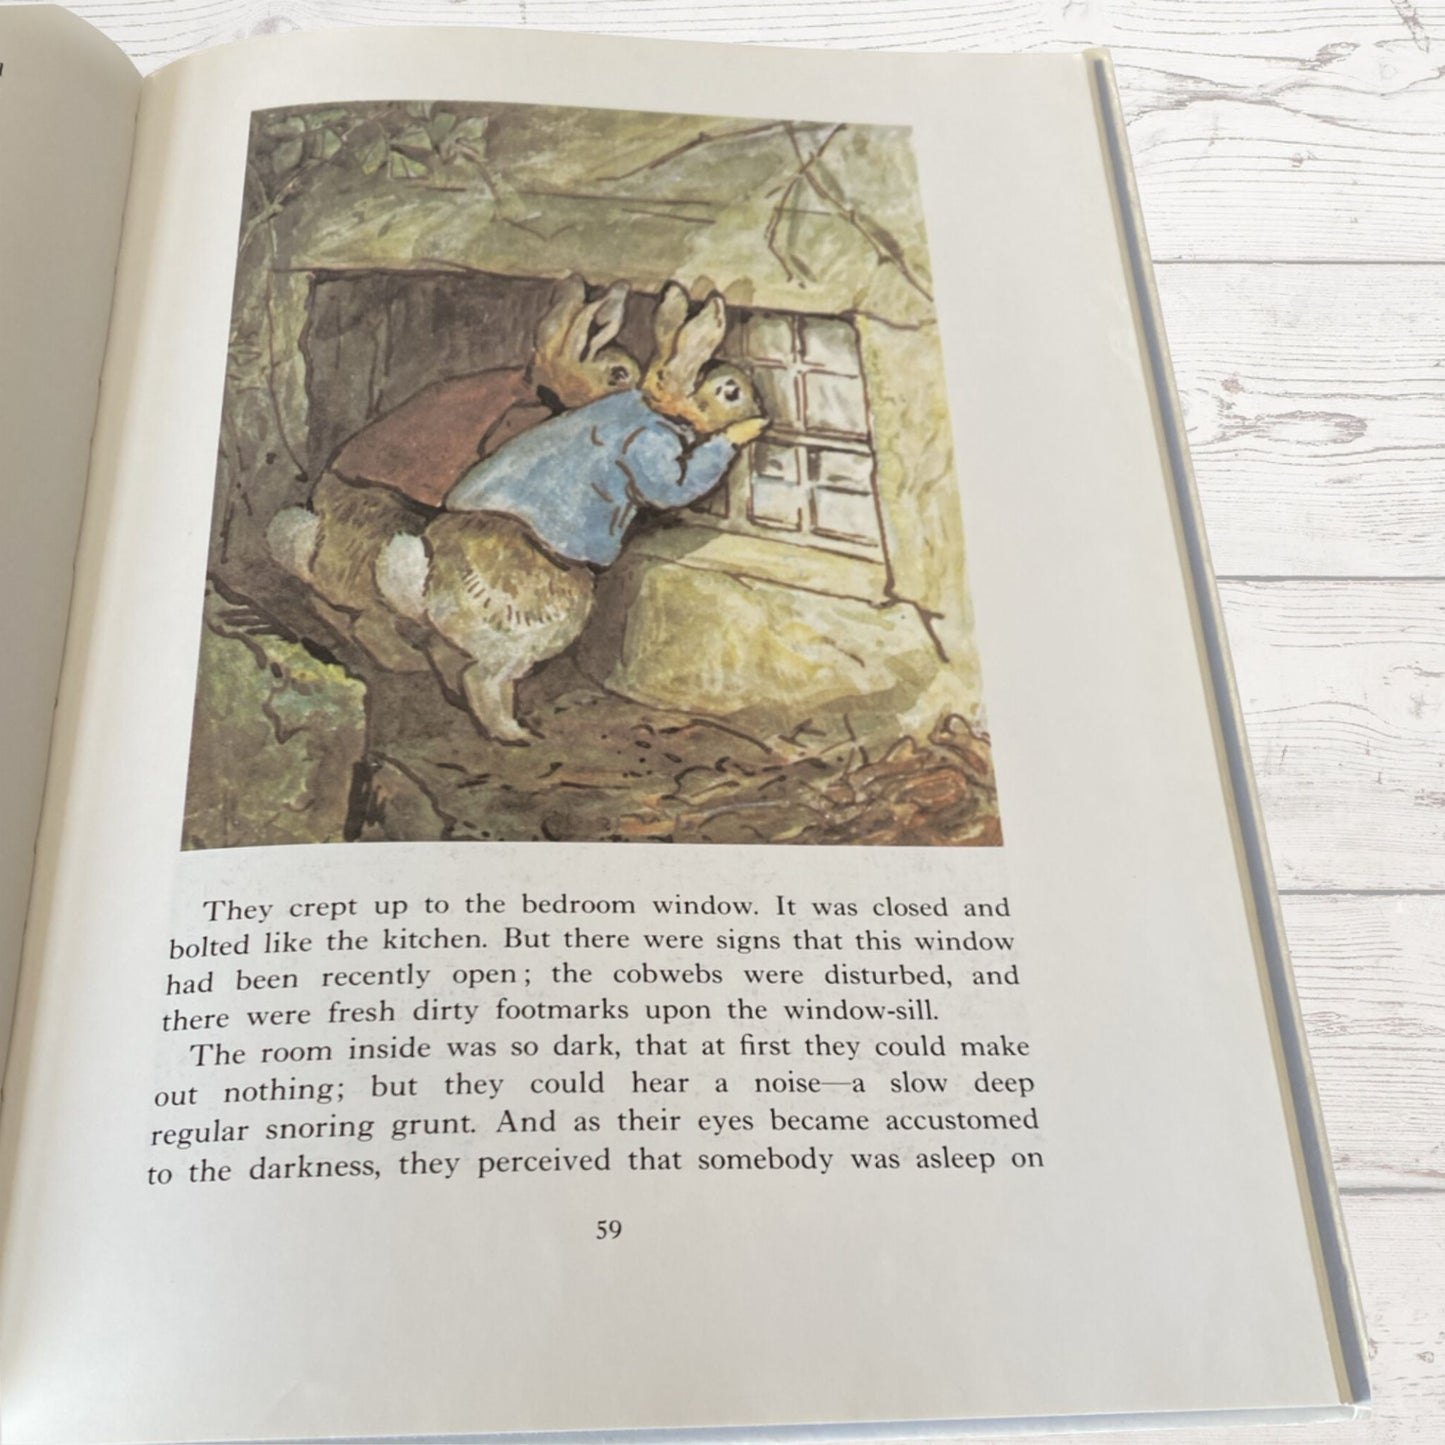 The Complete Adventures of Peter Rabbit: 1982 Edition - Fully Illustrated Hardcover Book